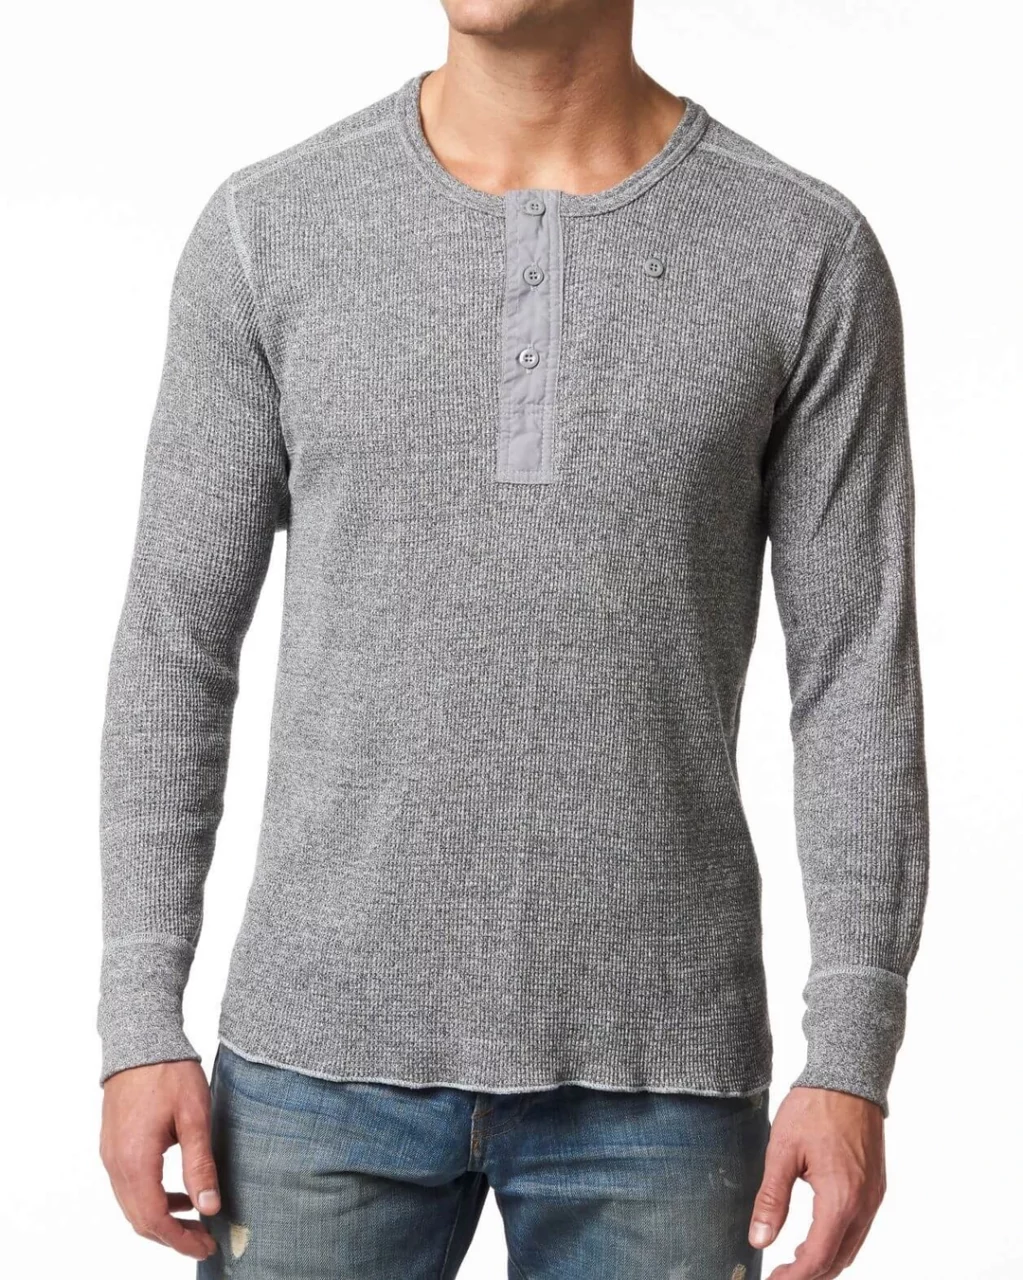 Stanfield's Undershirt Waffle Knit Henley. Long Sleeve in Grey or Indigo -  Fogey Unlimited